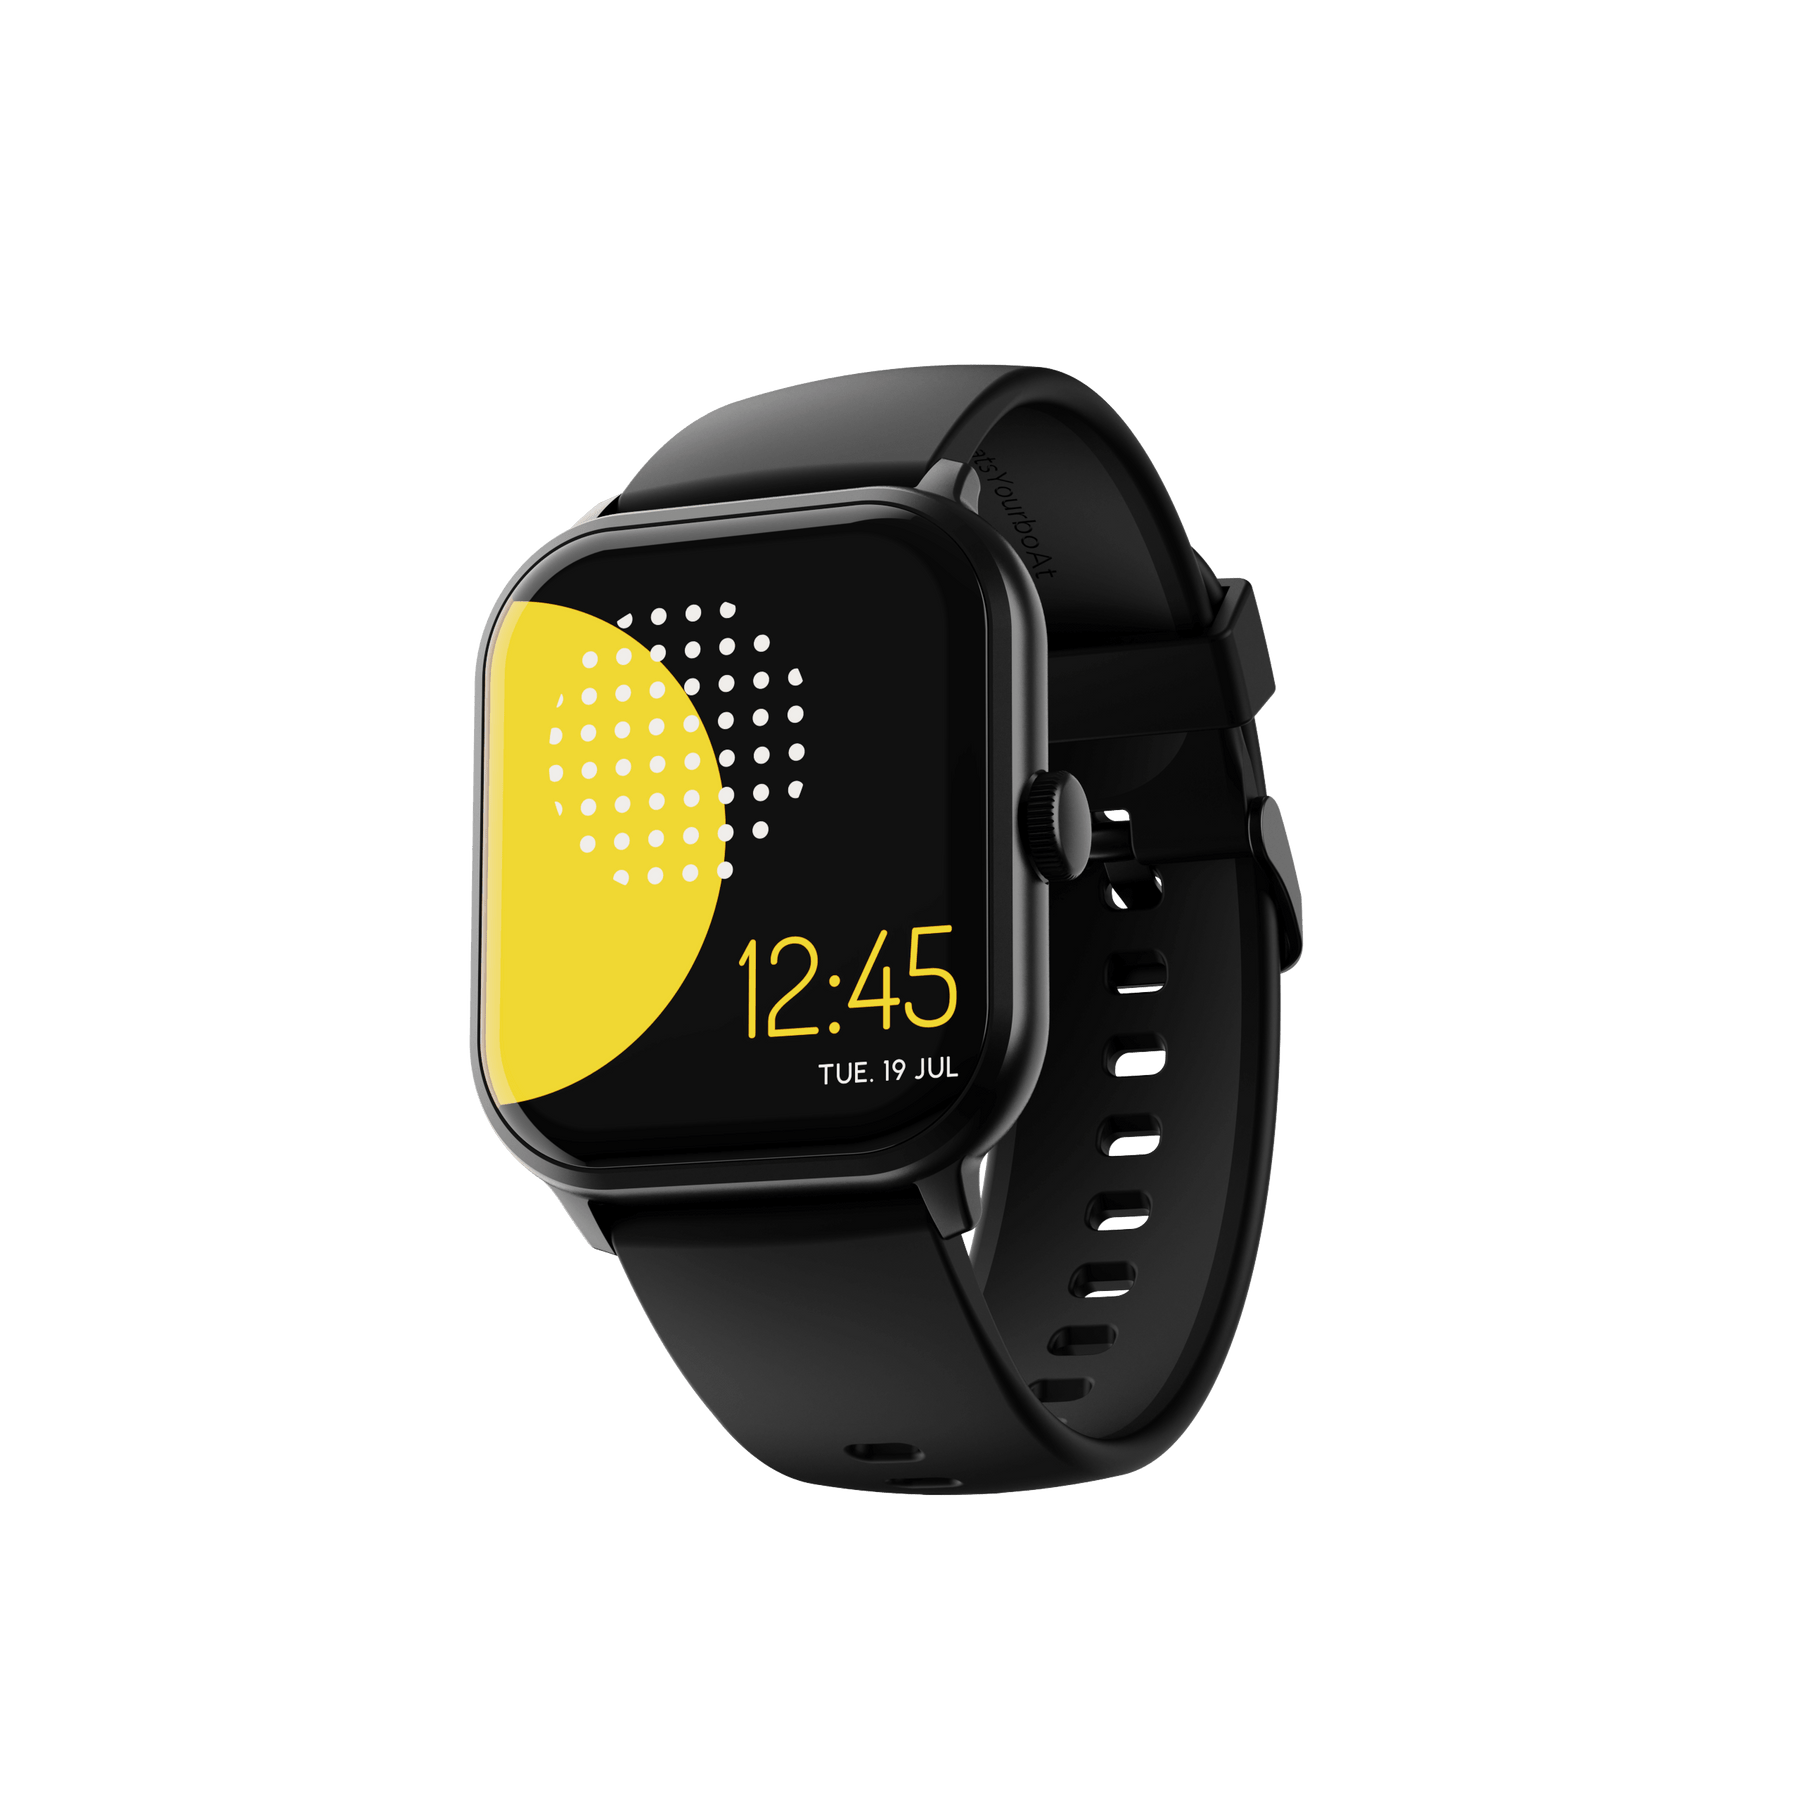 boAt Wave Infinity | Premium Smartwatch with Bluetooth Calling, 7 Days Battery Life, 100+ Watch Faces, 100+ Sports Mode